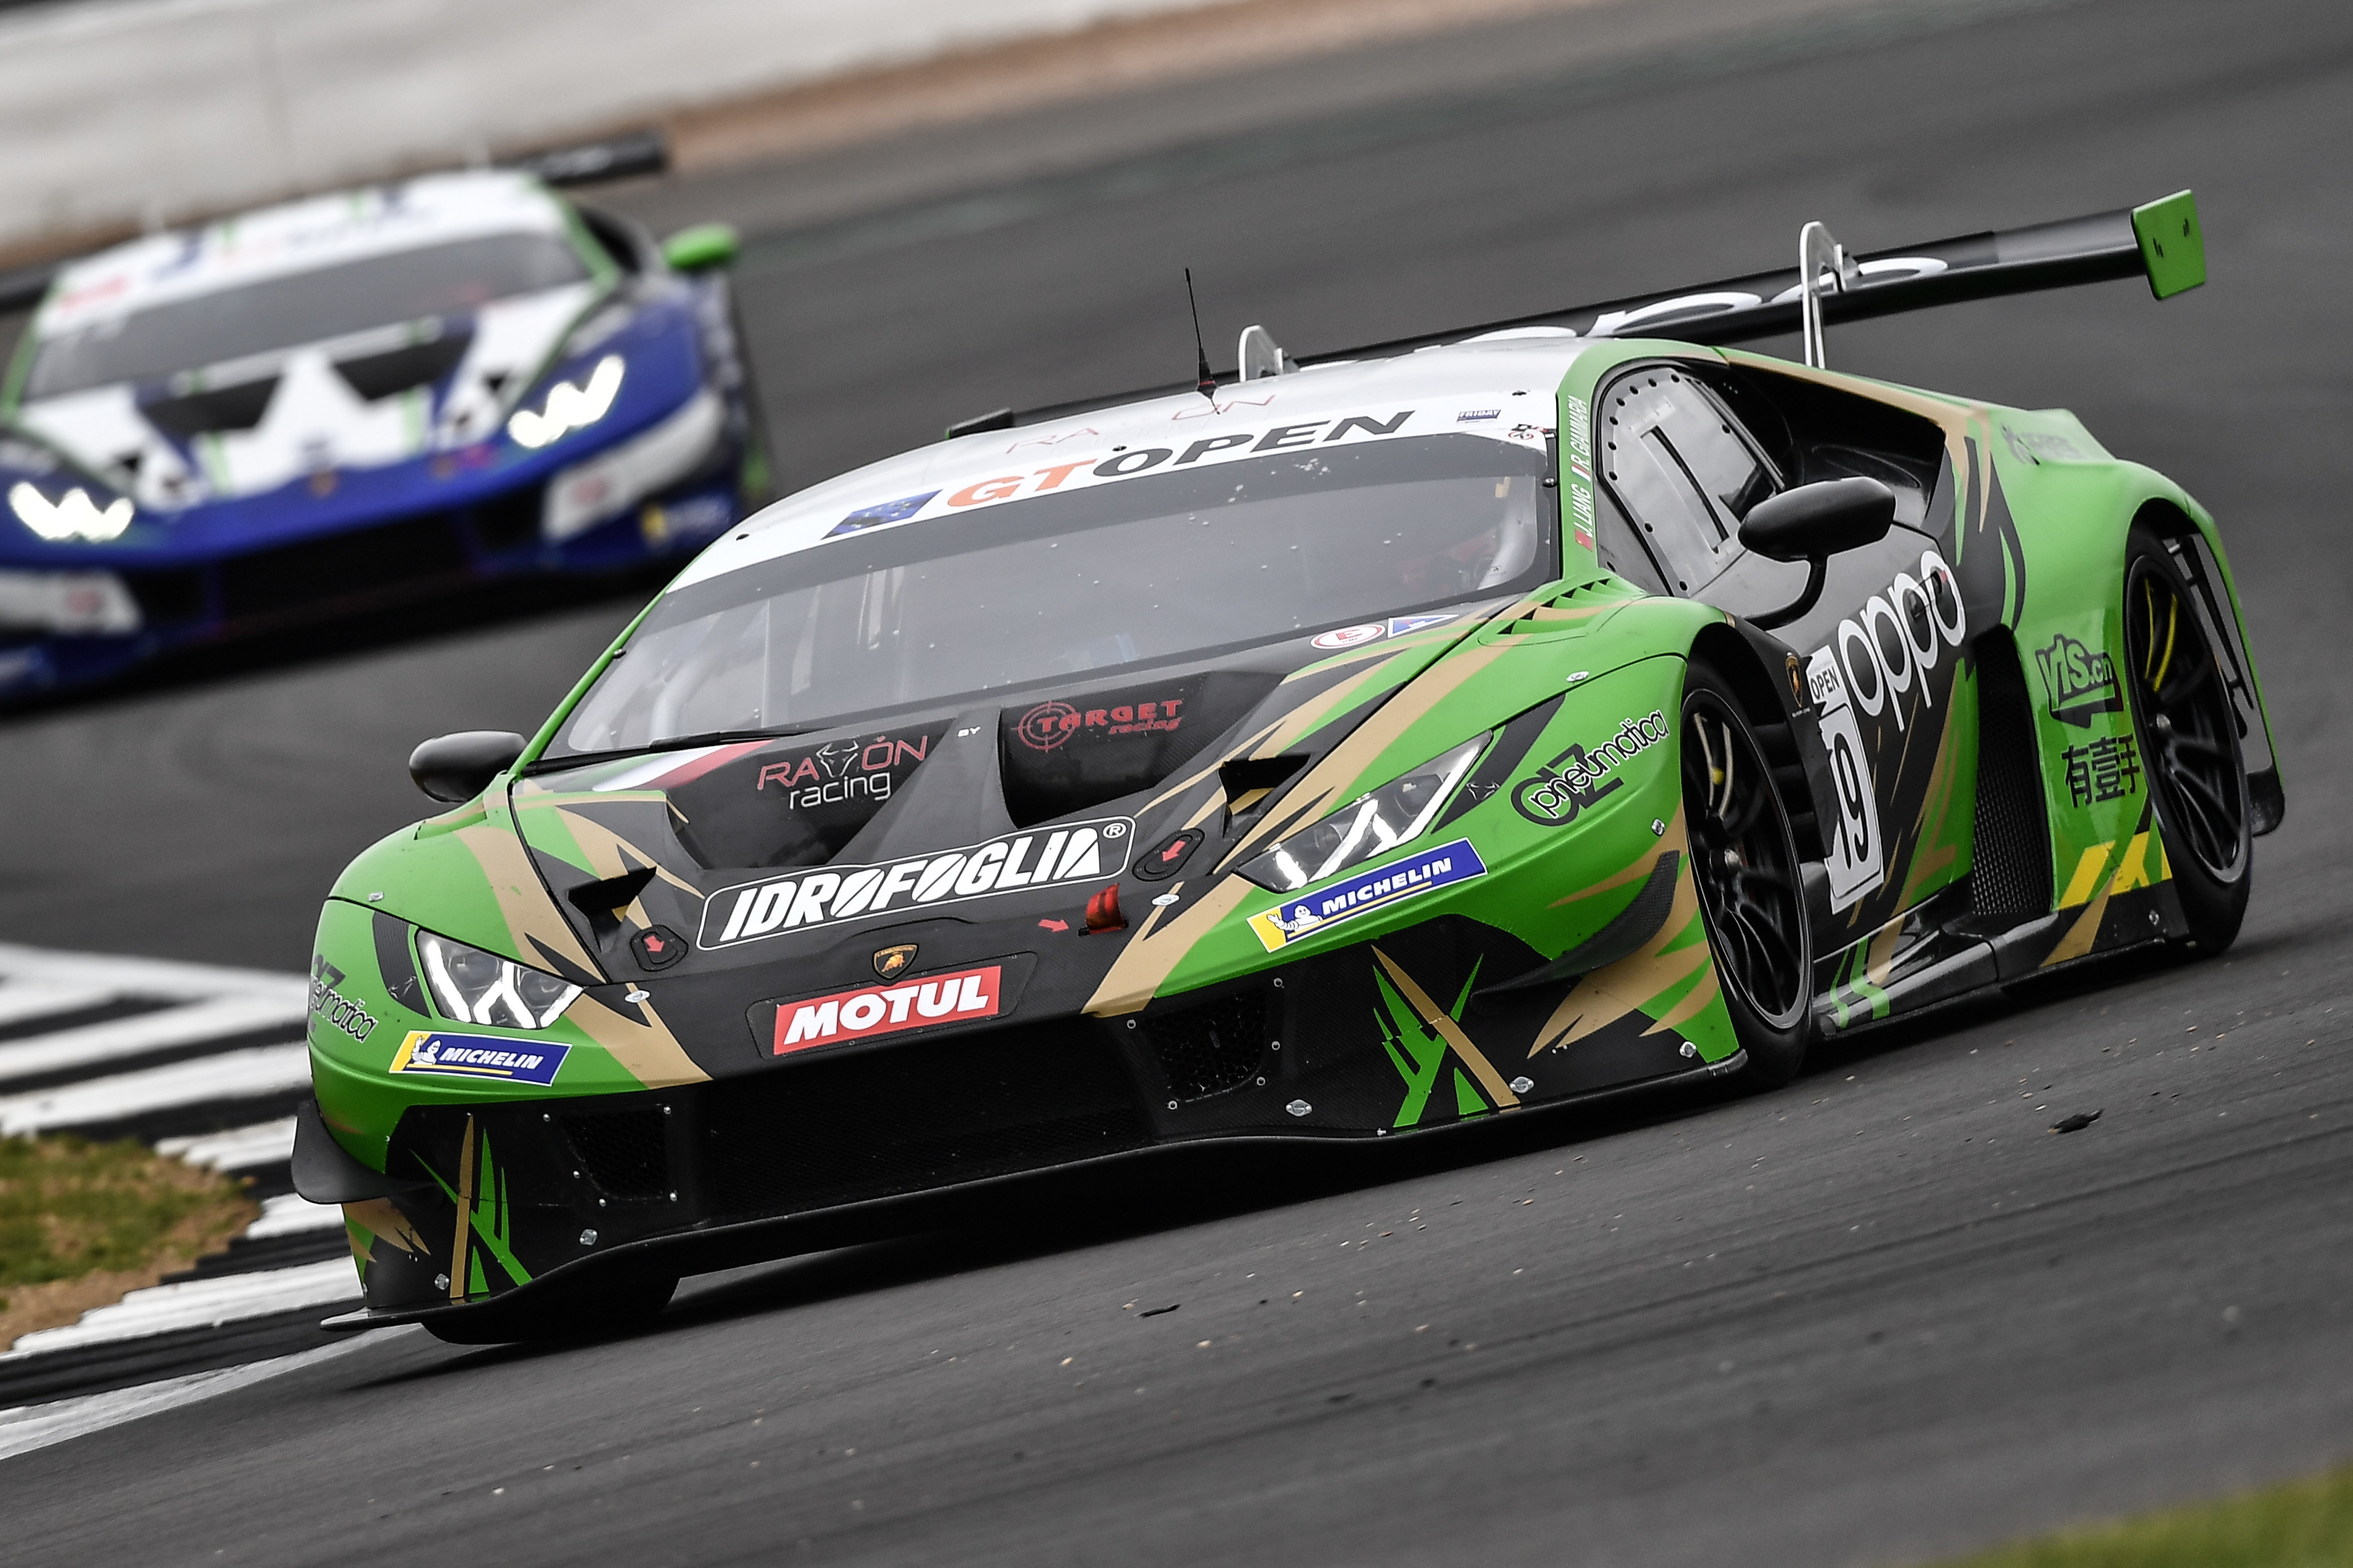 Raton by Target doubles fielding two cars at Montmelò for GT Open